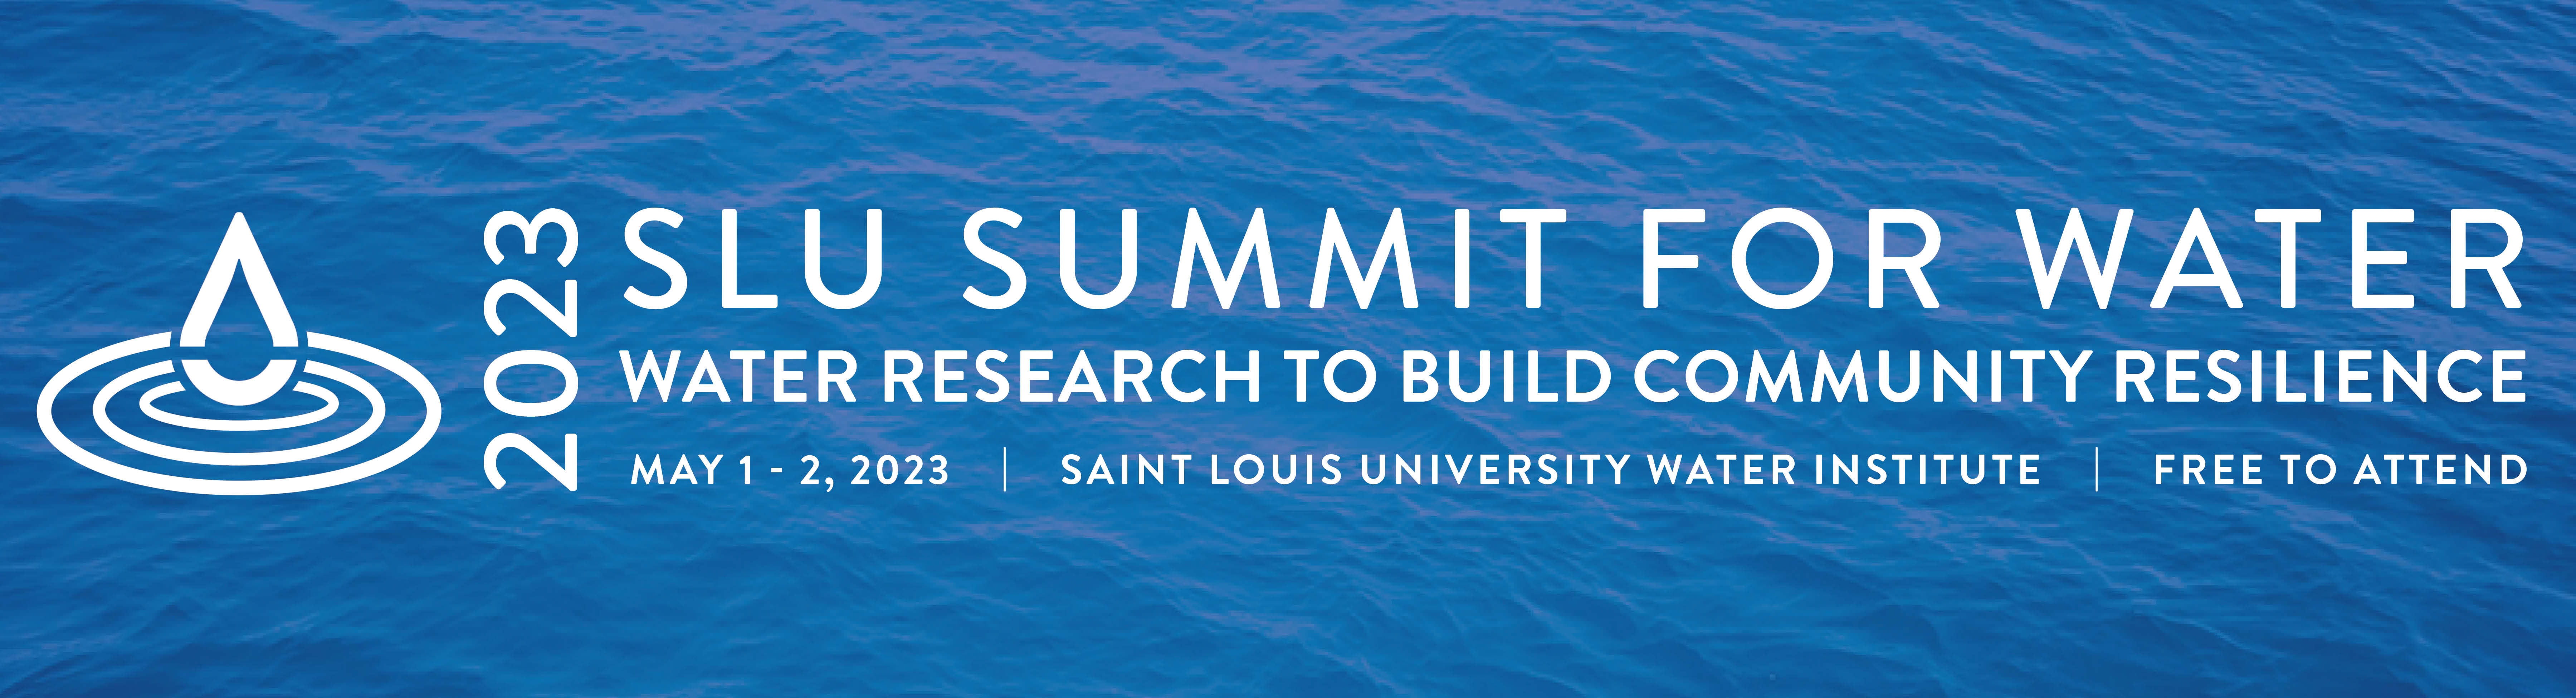 Infographic of letters on a background of water reading: SLU Summit for Water May 1 - 2, 2023, Water Research to Build Community Resilience, Saint Louis University WATER Institute, Free to Attend.event held from May 1 - 2, 2023